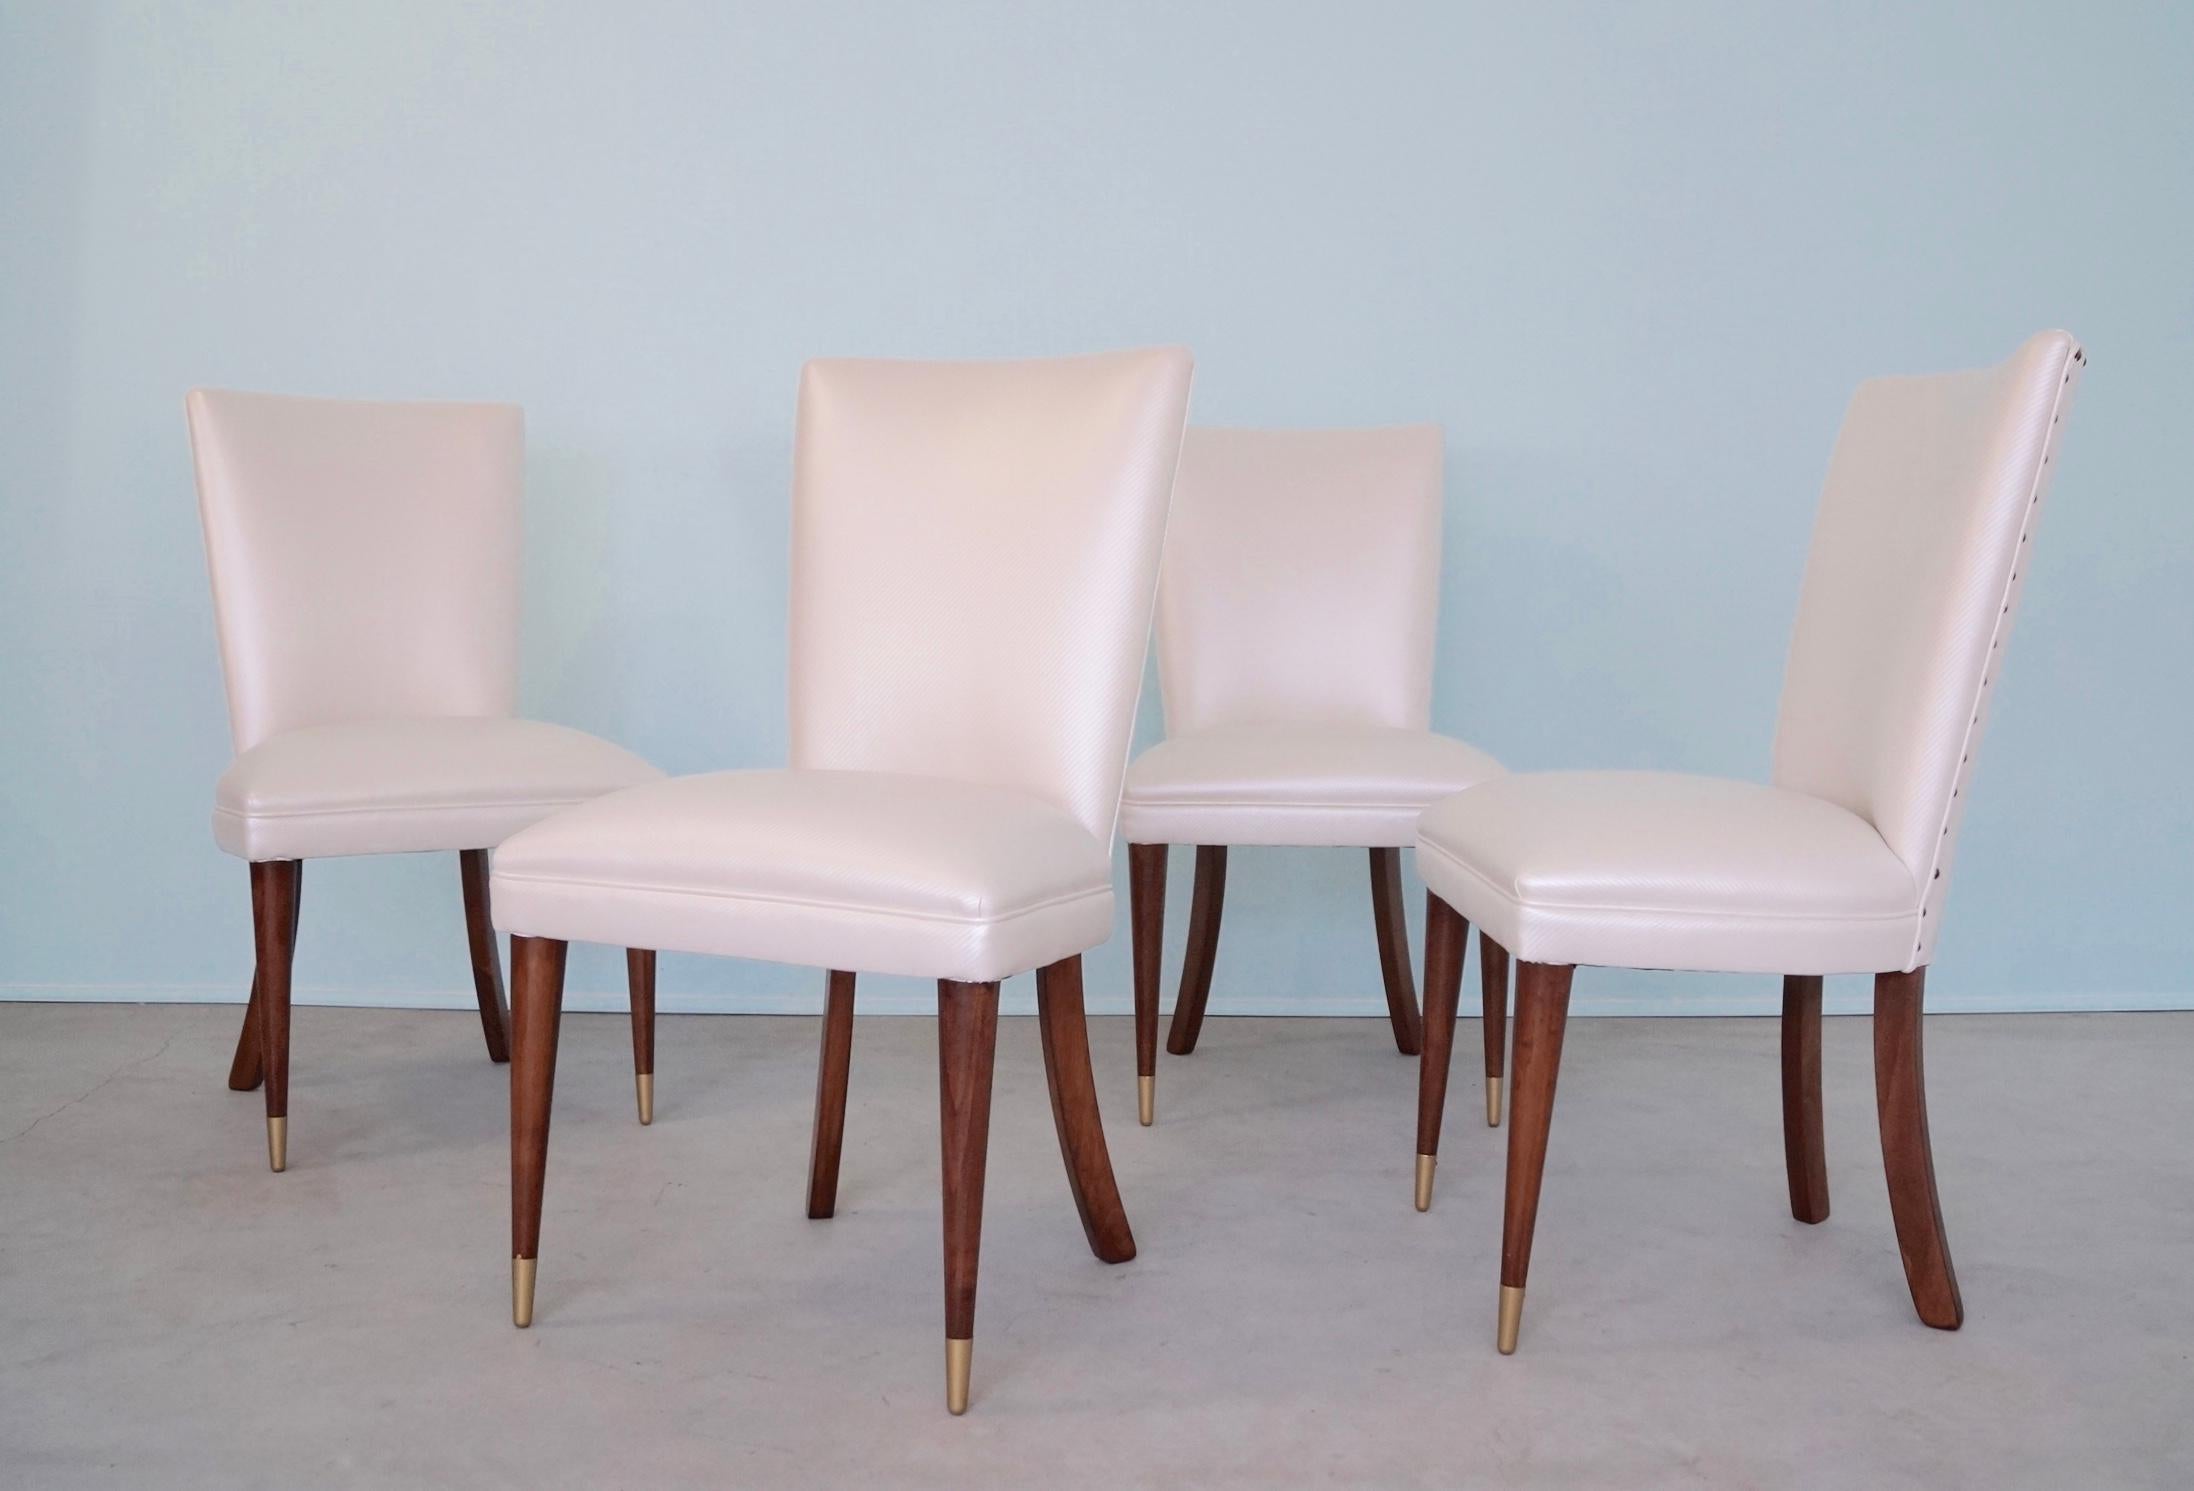 American 1950's Mid-Century Modern Hollywood Regency Dining Chairs - Set of 4 For Sale